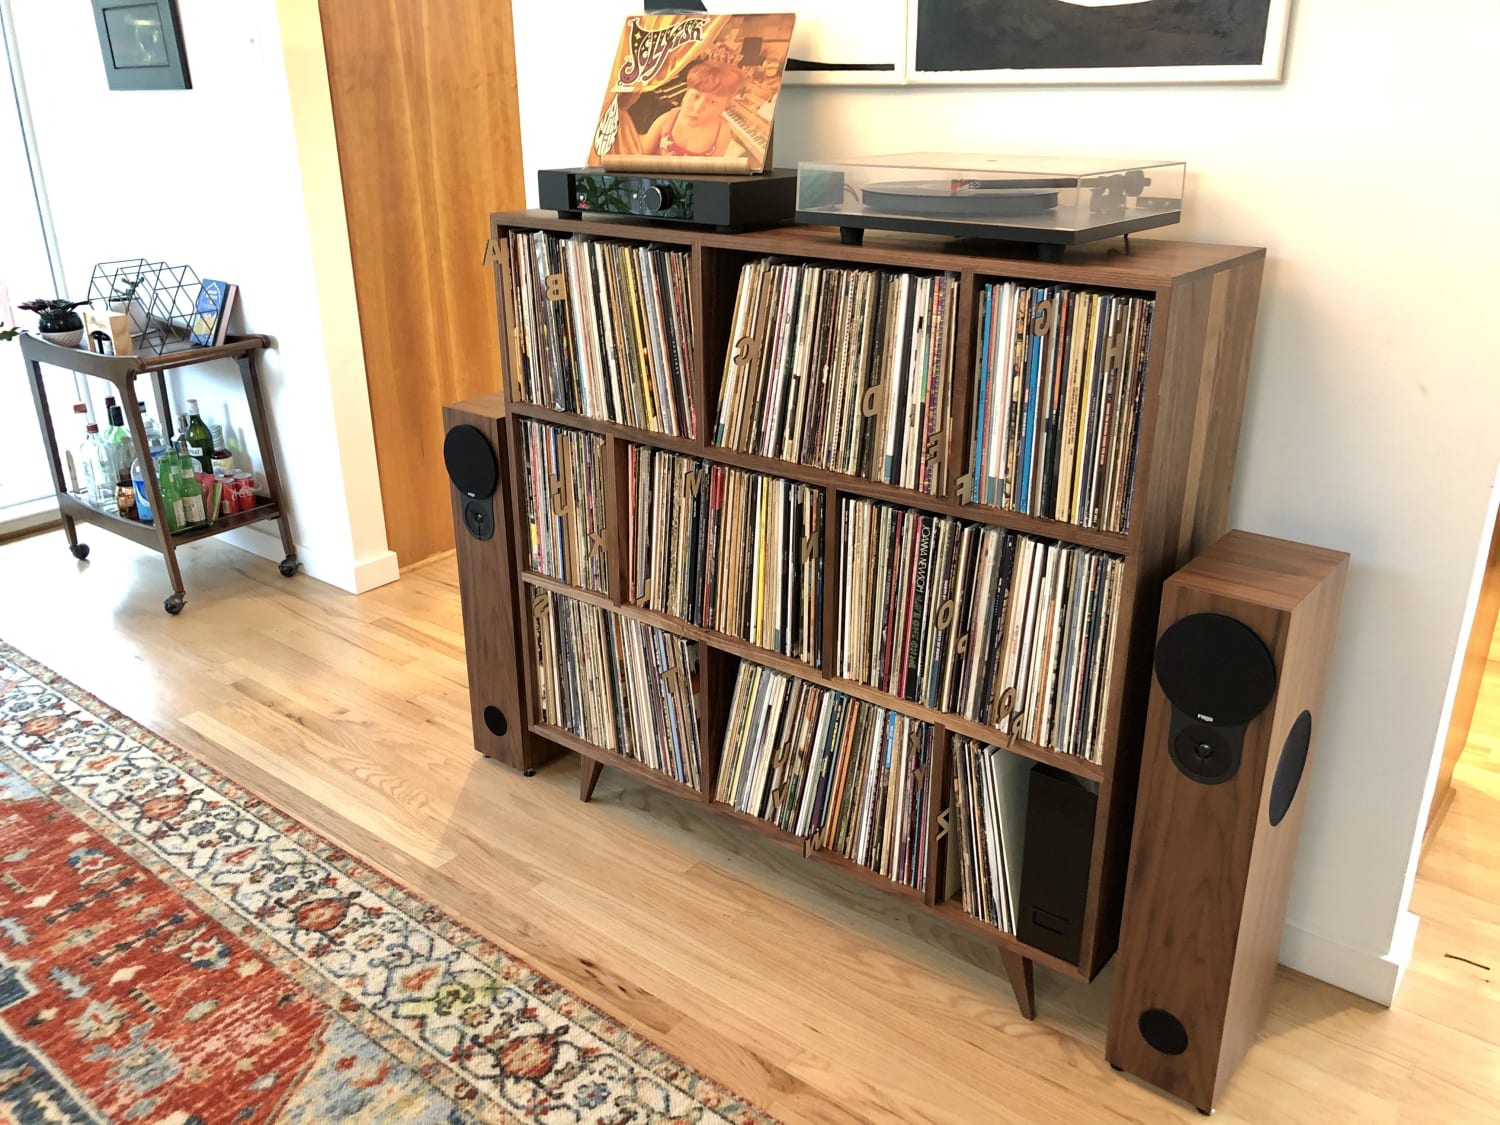 New hardwood cabinet for the collection, all Rega setup